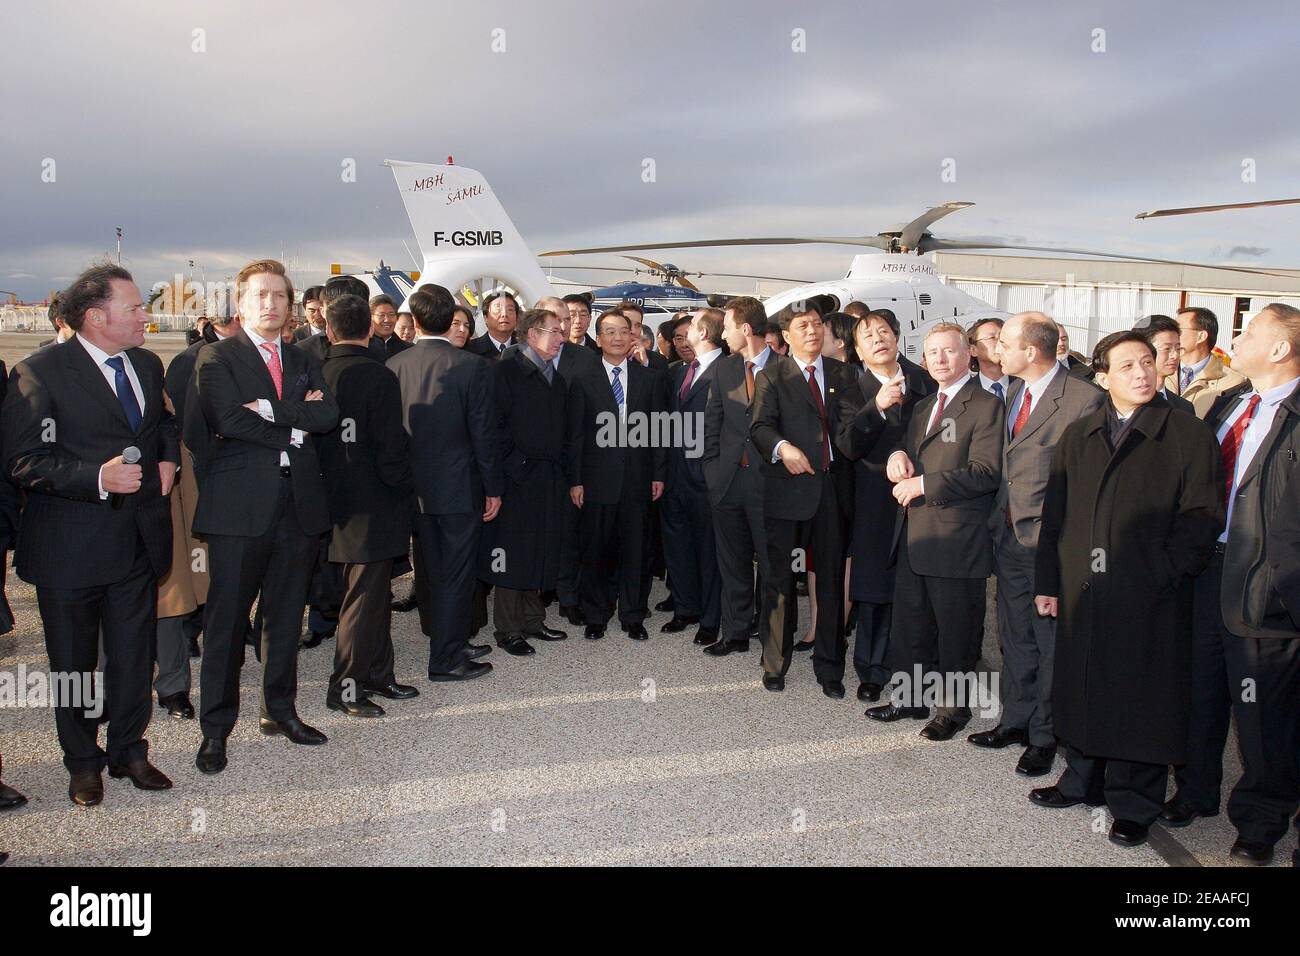 Chinese Prime Minister, Wen Jiabao, visits the southeastern Eurocopter site in Marignane near Marseille, the 6th of December 2005. Photo by Gerald Holubowicz/ABACAPRESS.COM Stock Photo